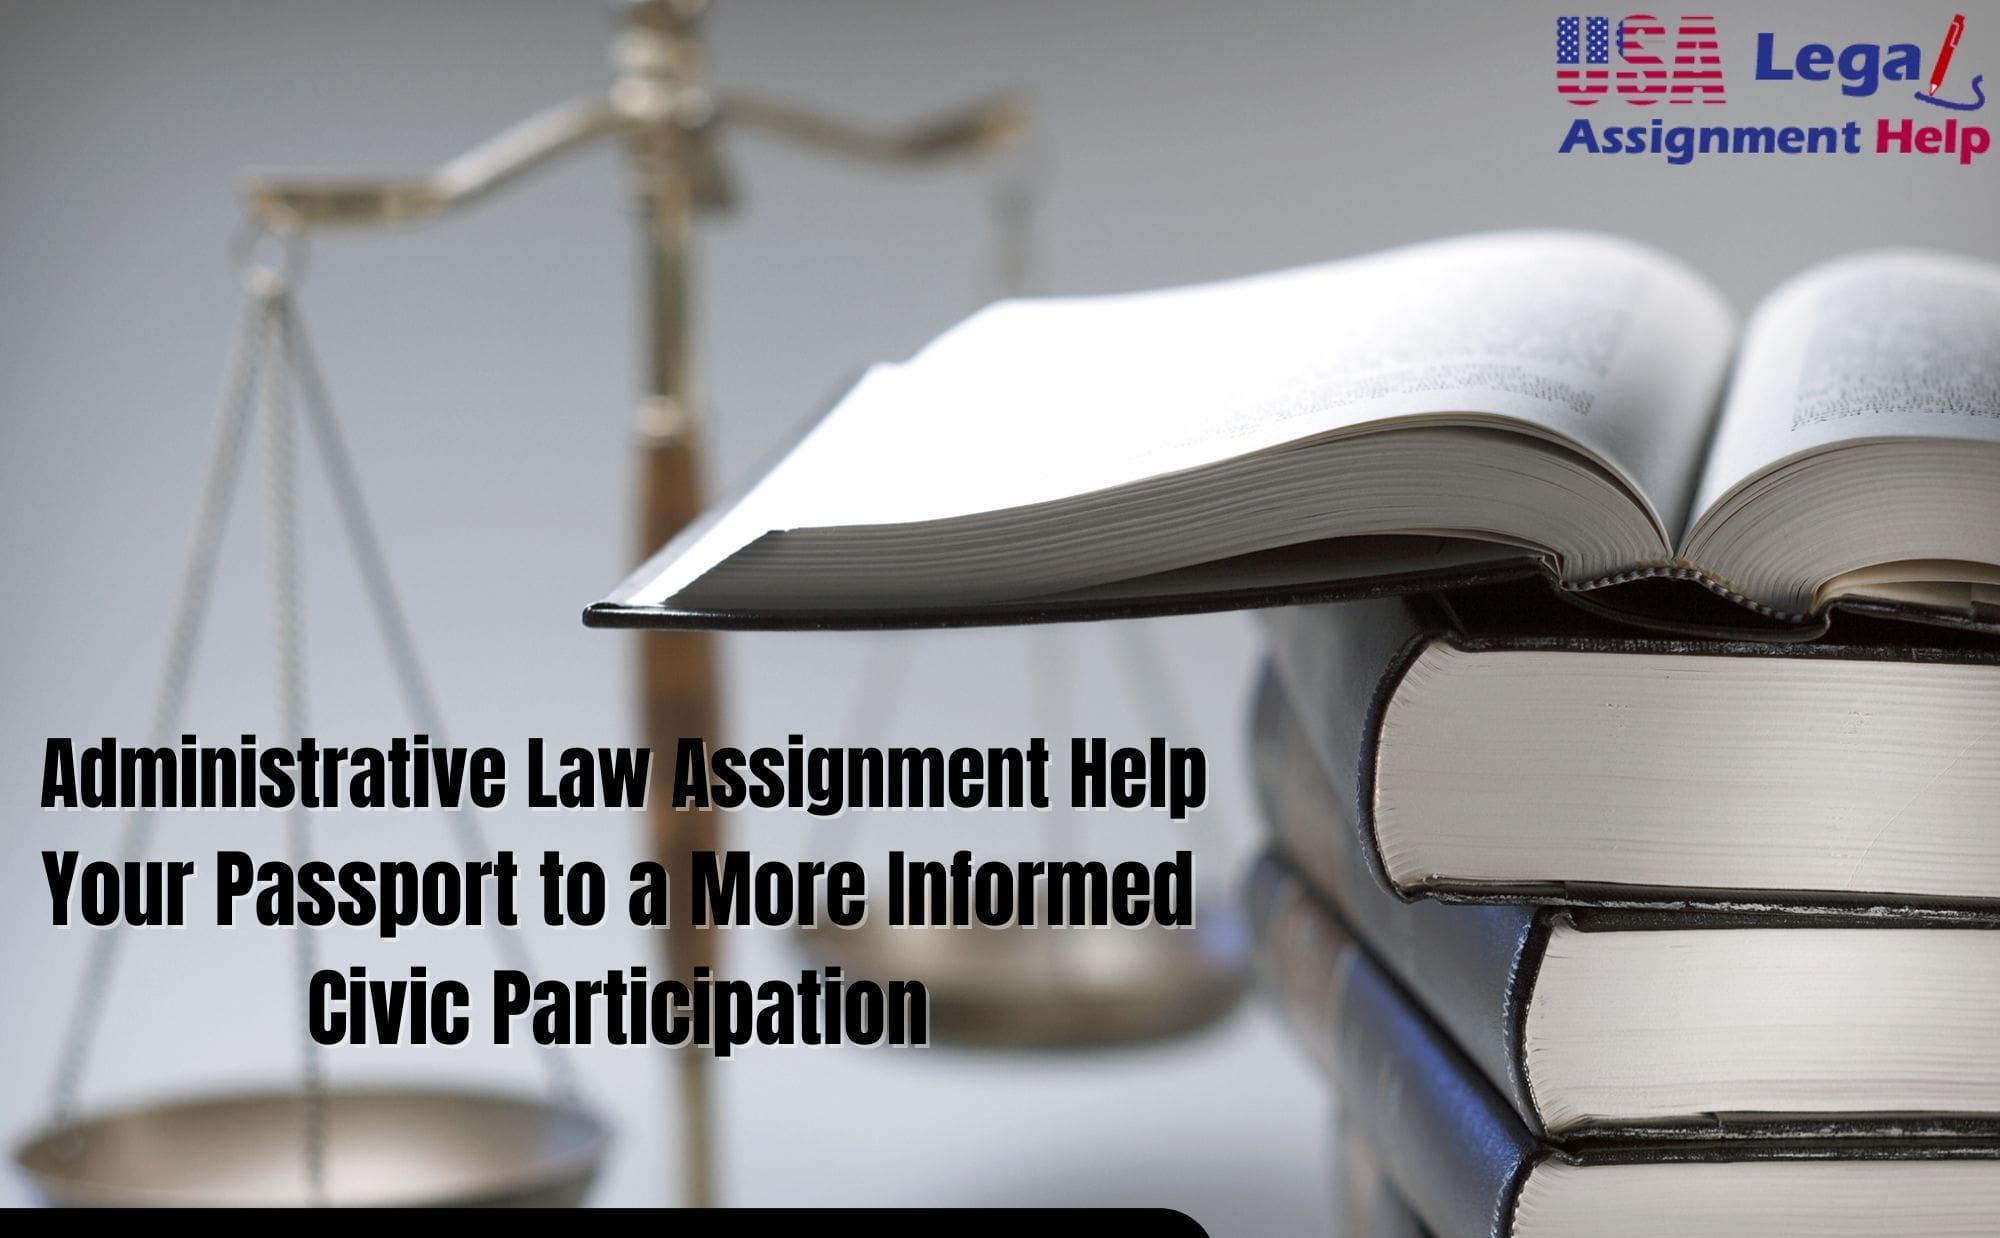 Administrative Law Assignment Help: Your Passport to a More Informed Civic Participation